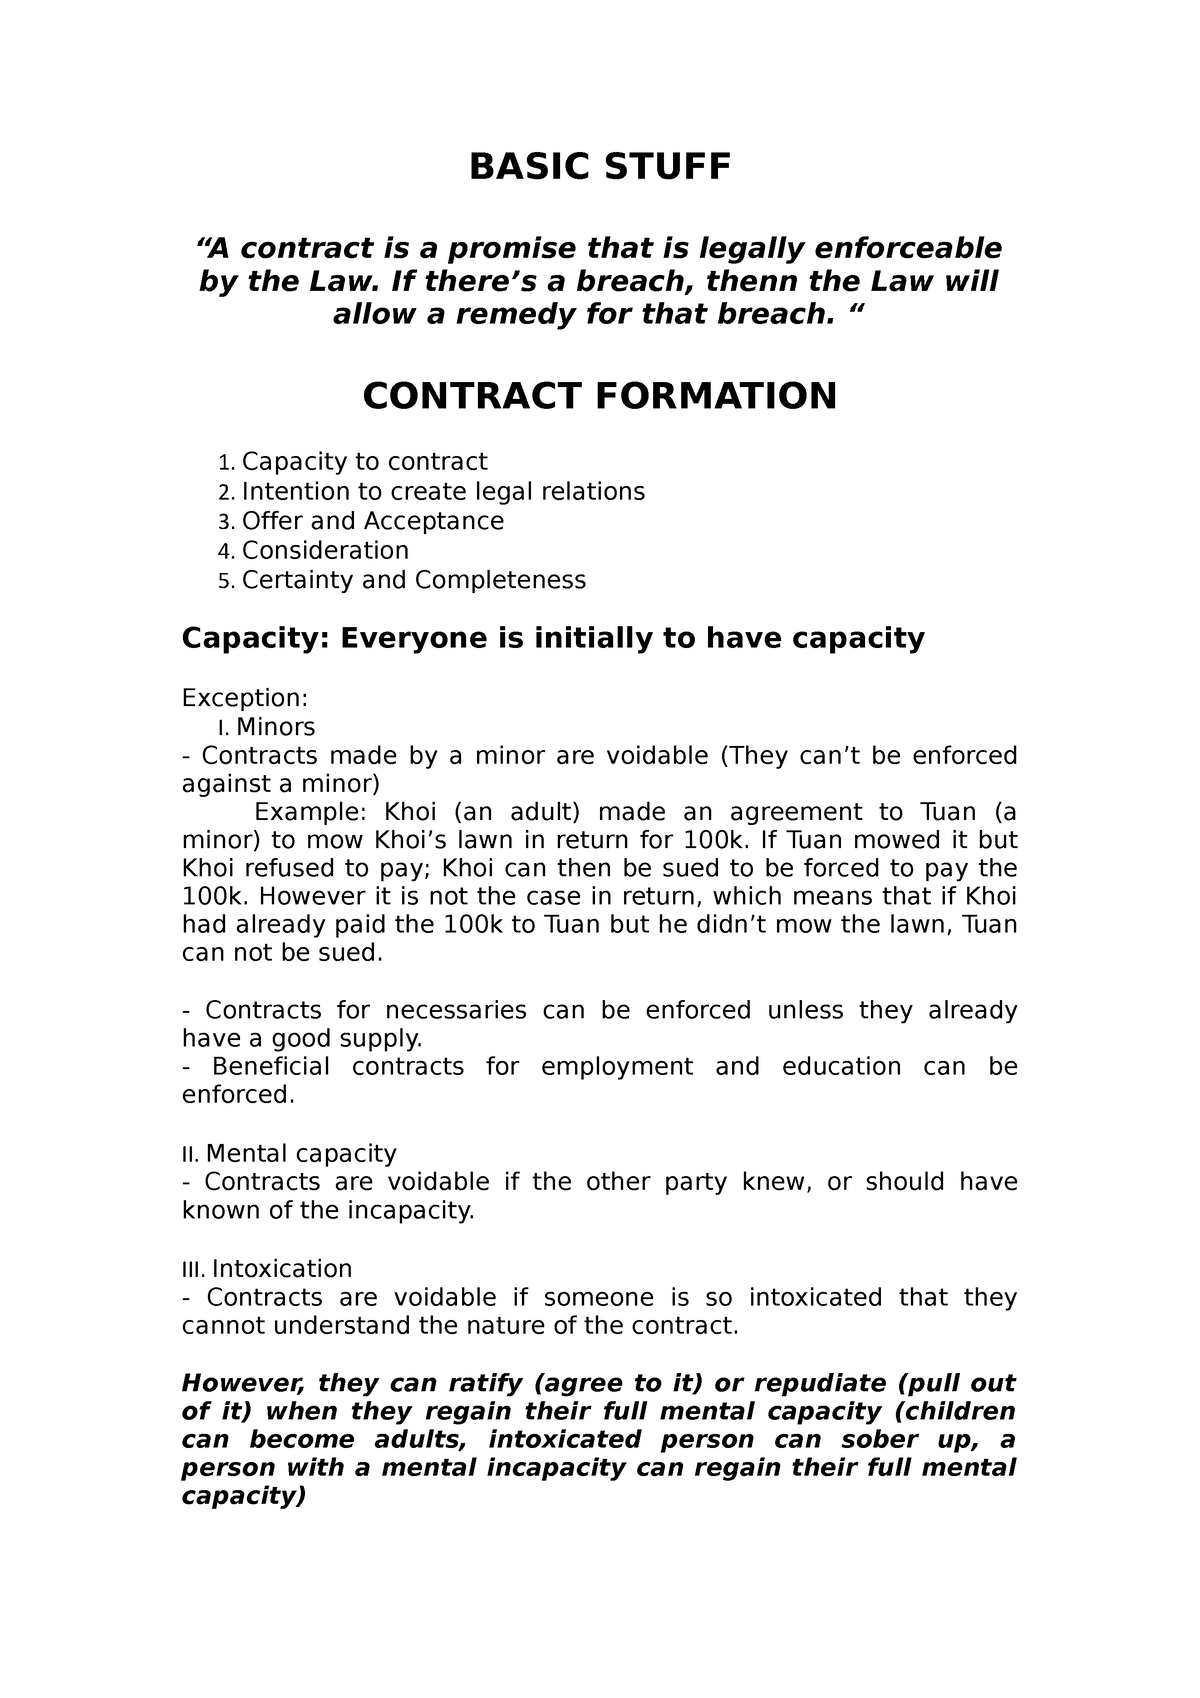 contract-law-in-a-nutshell-basic-stuff-a-contract-is-a-promise-that